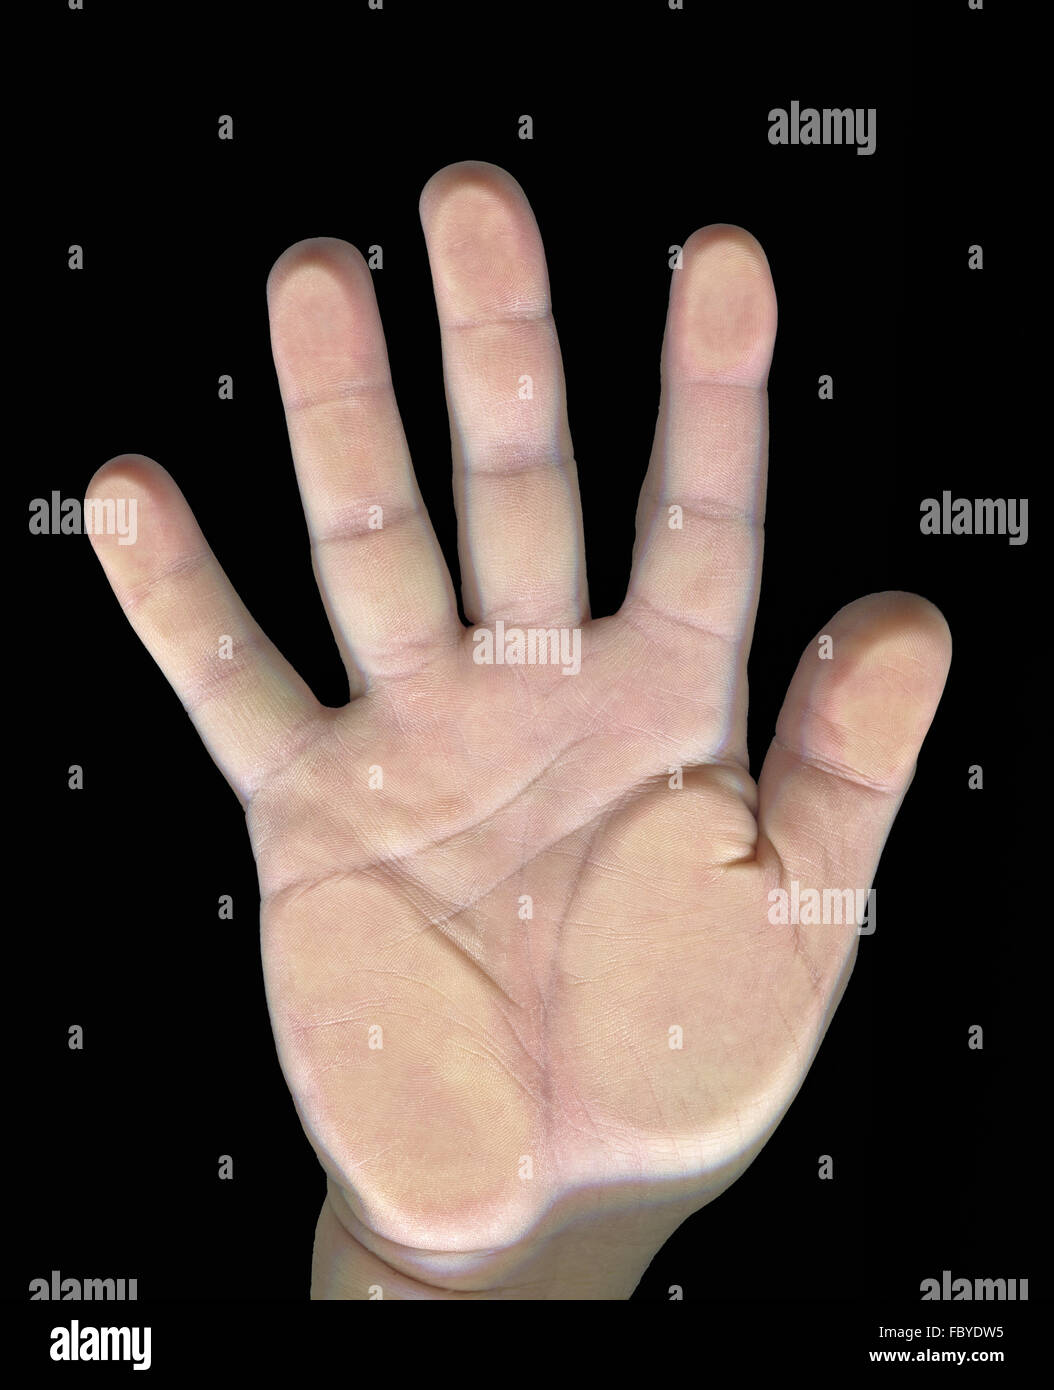 right hand on a glass plate Stock Photo